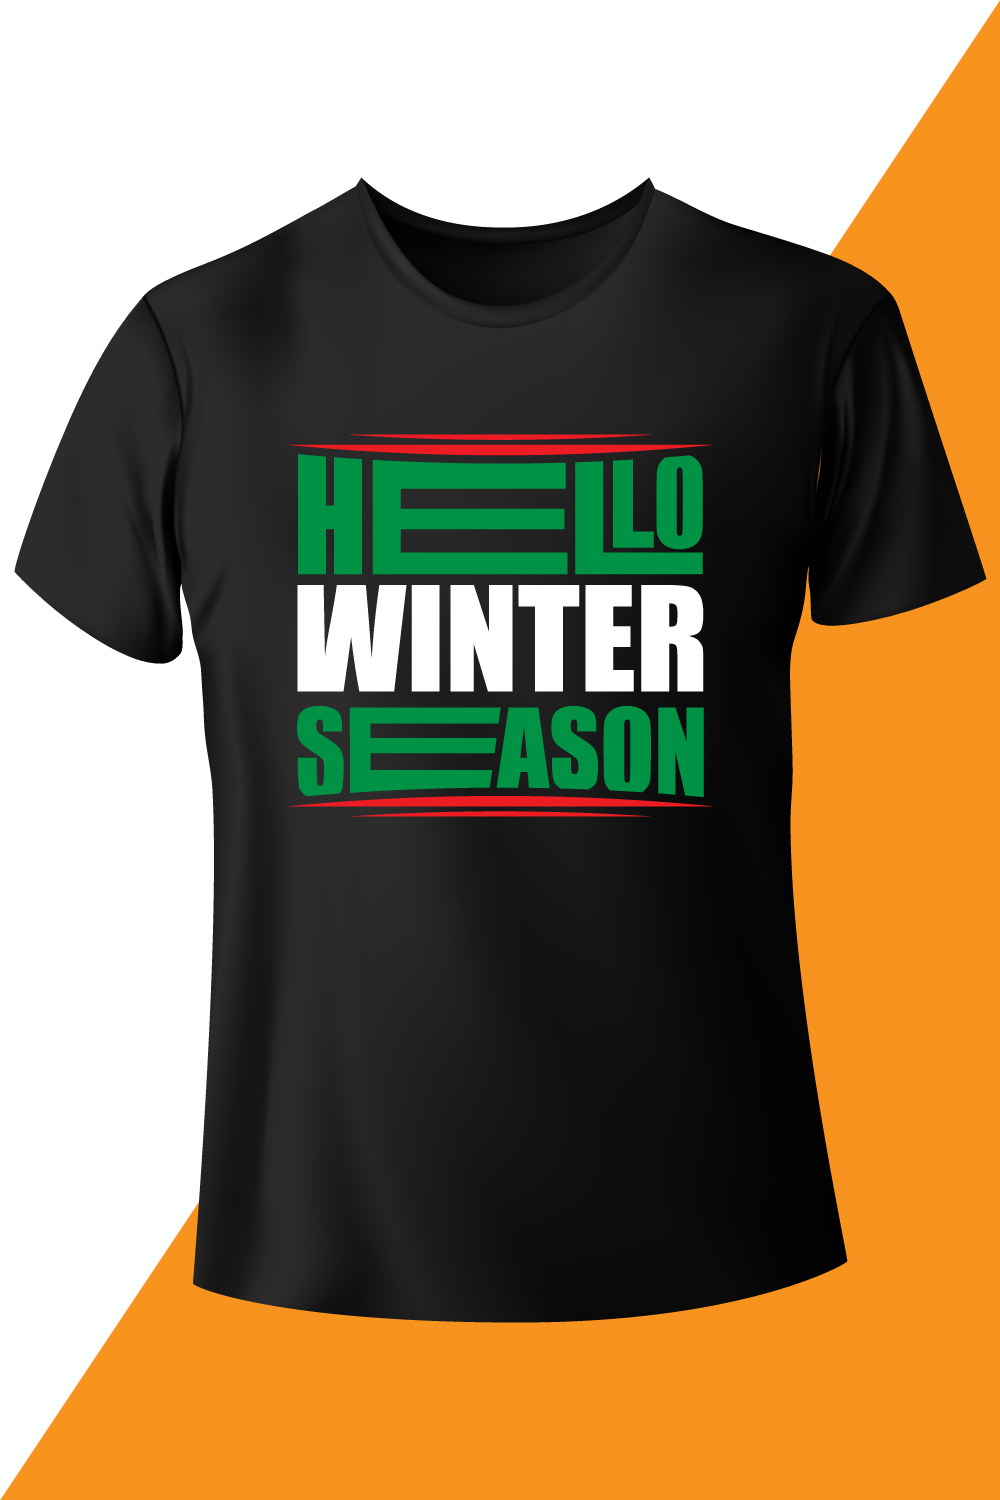 Image from a black t-shirt with a charming inscription hello winter season.